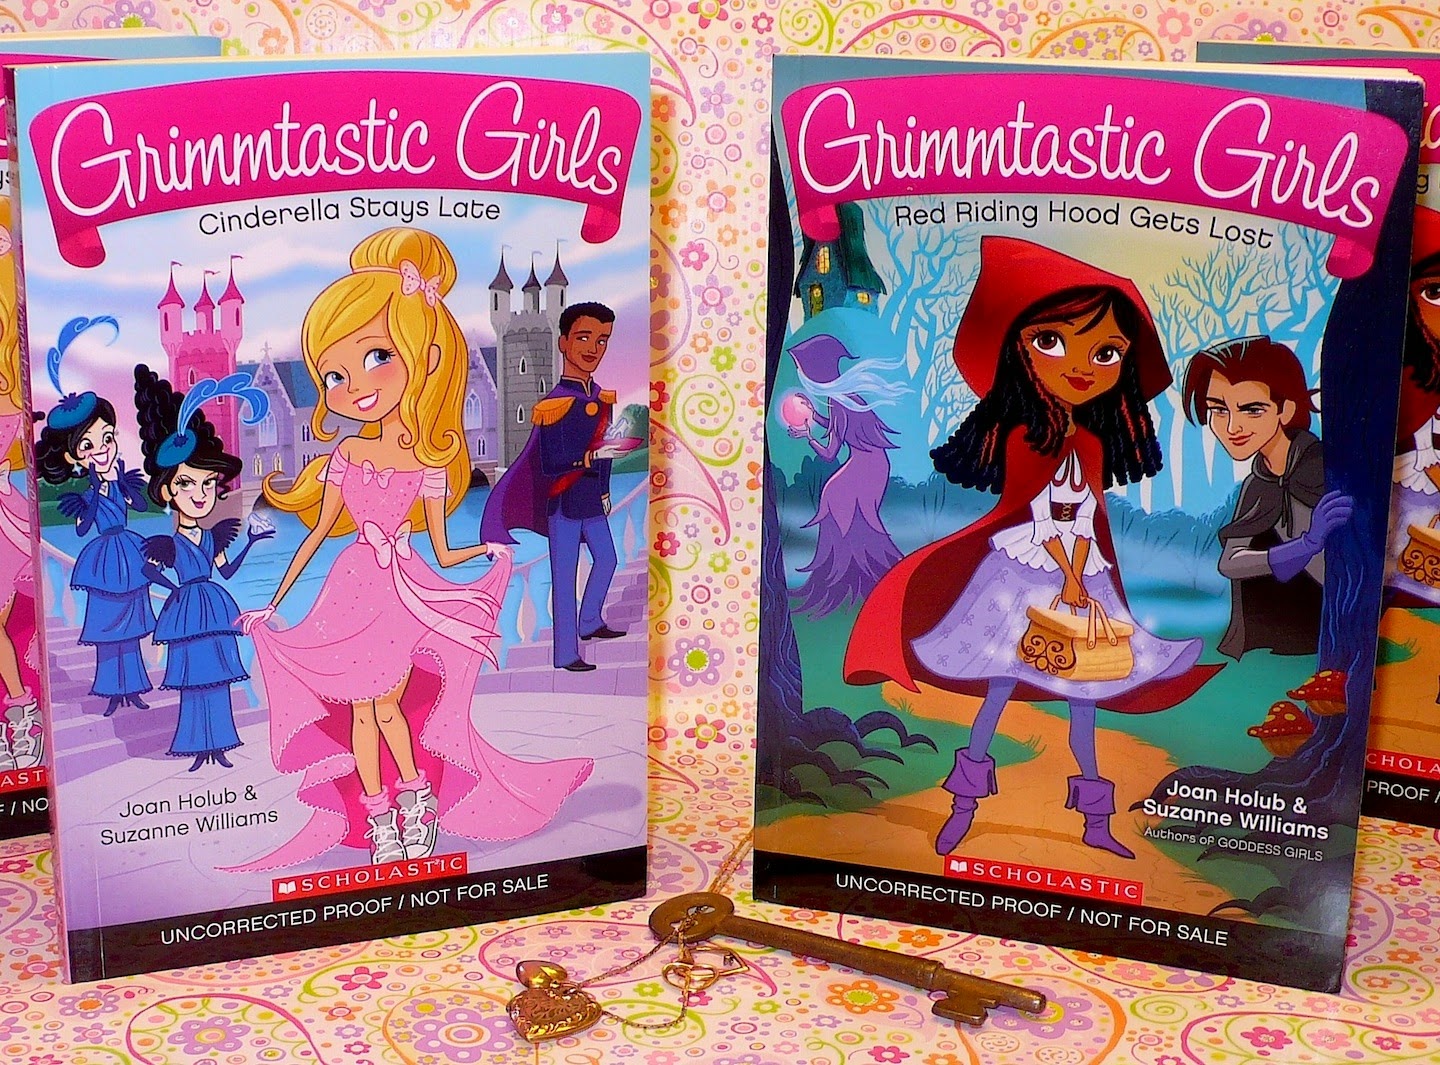 http://www.amazon.com/Grimmtastic-Girls-Cinderella-Stays-Late/dp/0545519837/ref=sr_1_1_title_0_main?s=books&ie=UTF8&qid=1389320824&sr=1-1&keywords=cinderella+stays+late